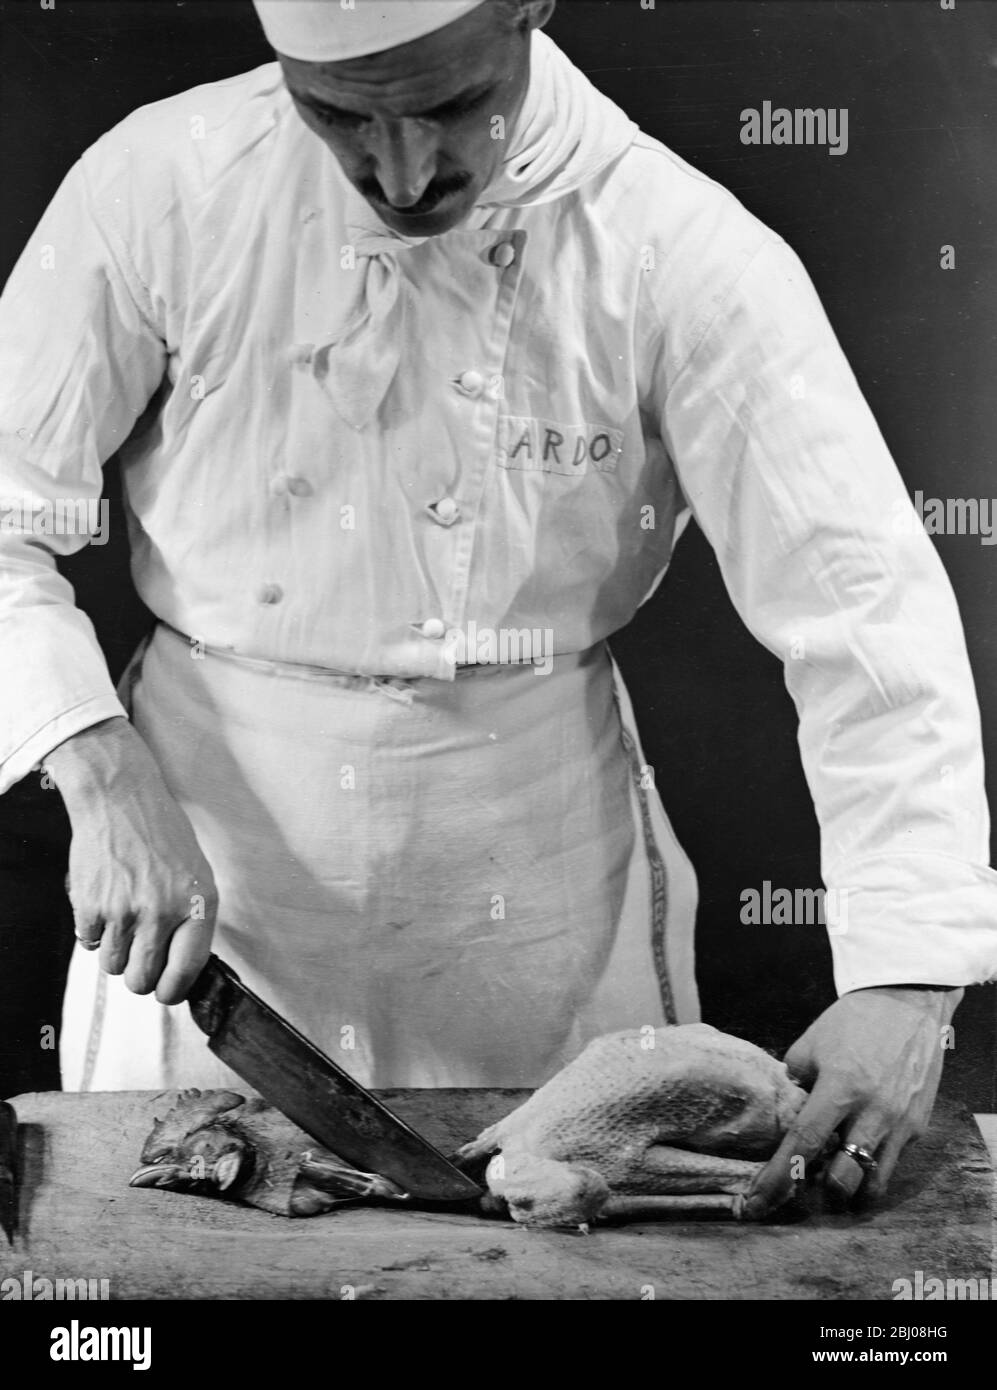 A chef prepares a chicken for cooking. - Milan, Italy. - undated - Stock Photo